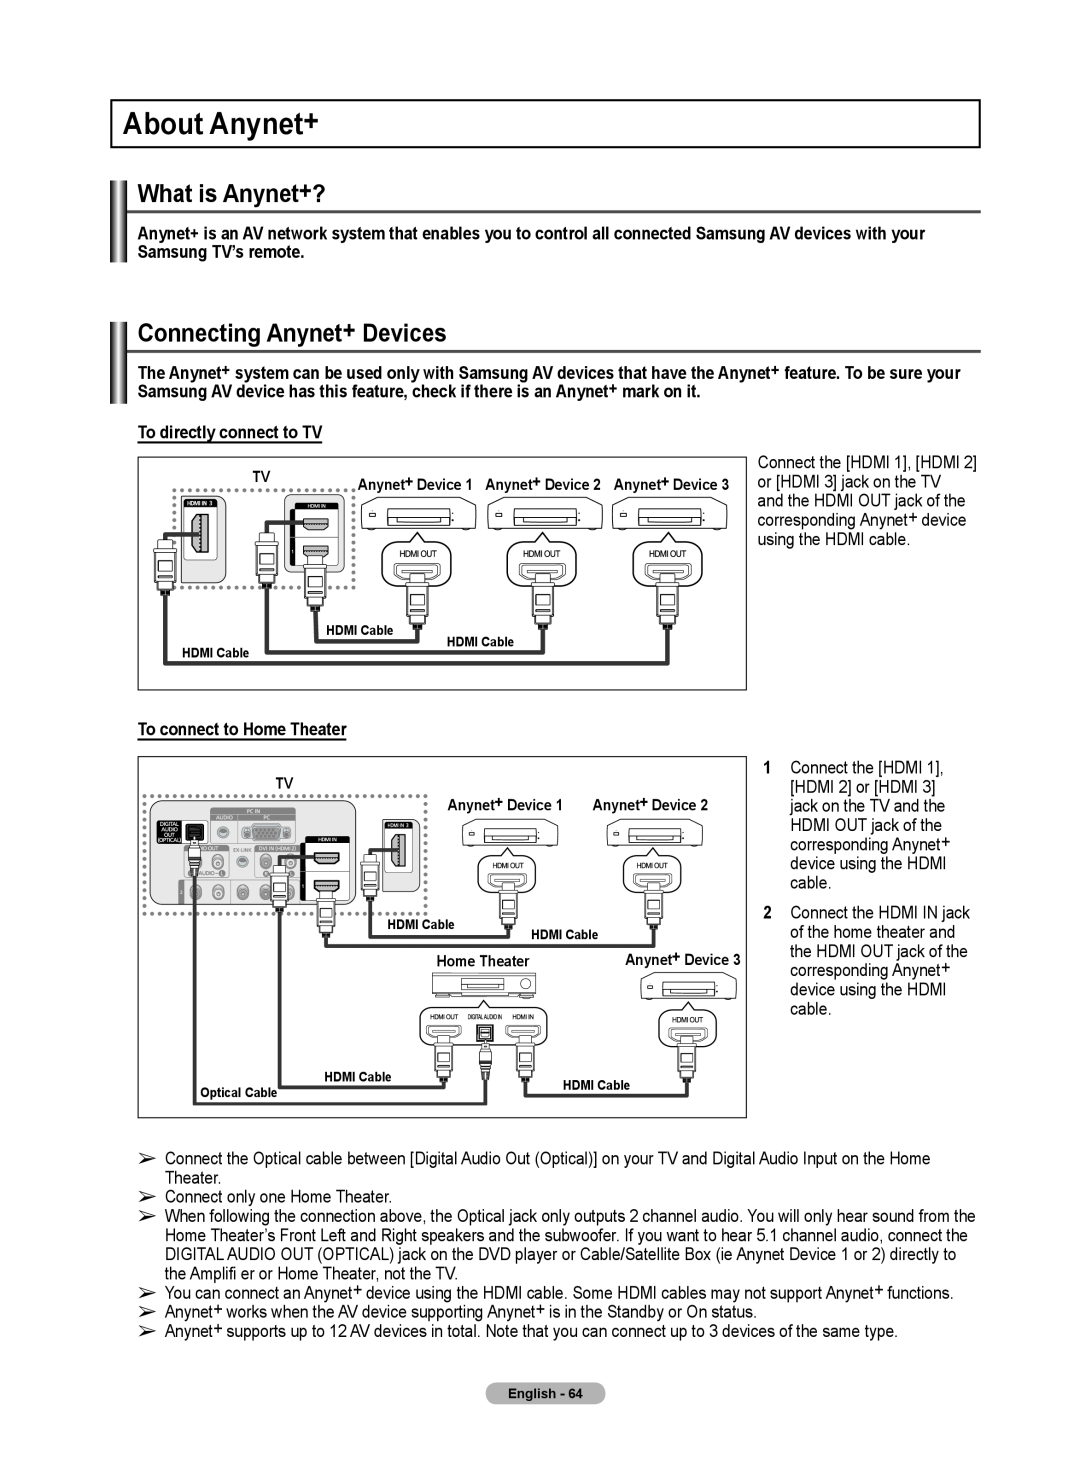 Samsung 460 user manual About Anynet+, What is Anynet+?, Connecting Anynet+ Devices, To directly connect to TV 